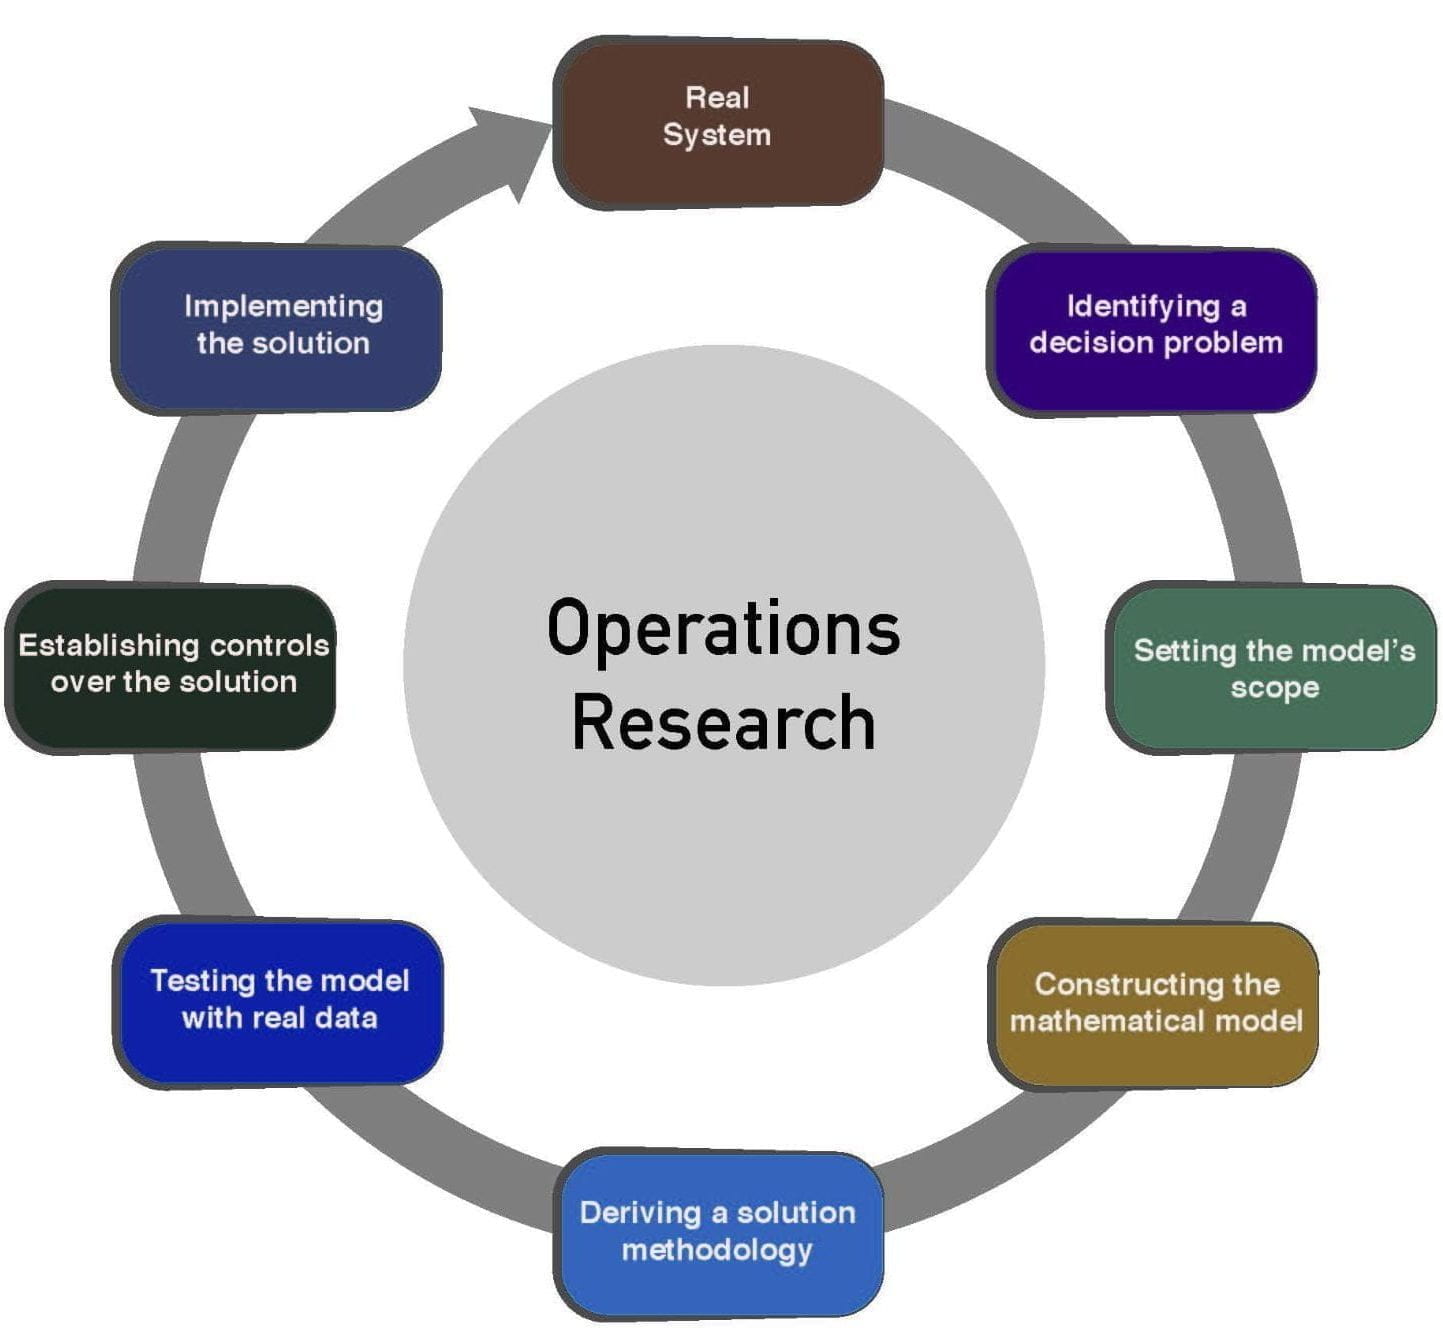 operations research phd programs us